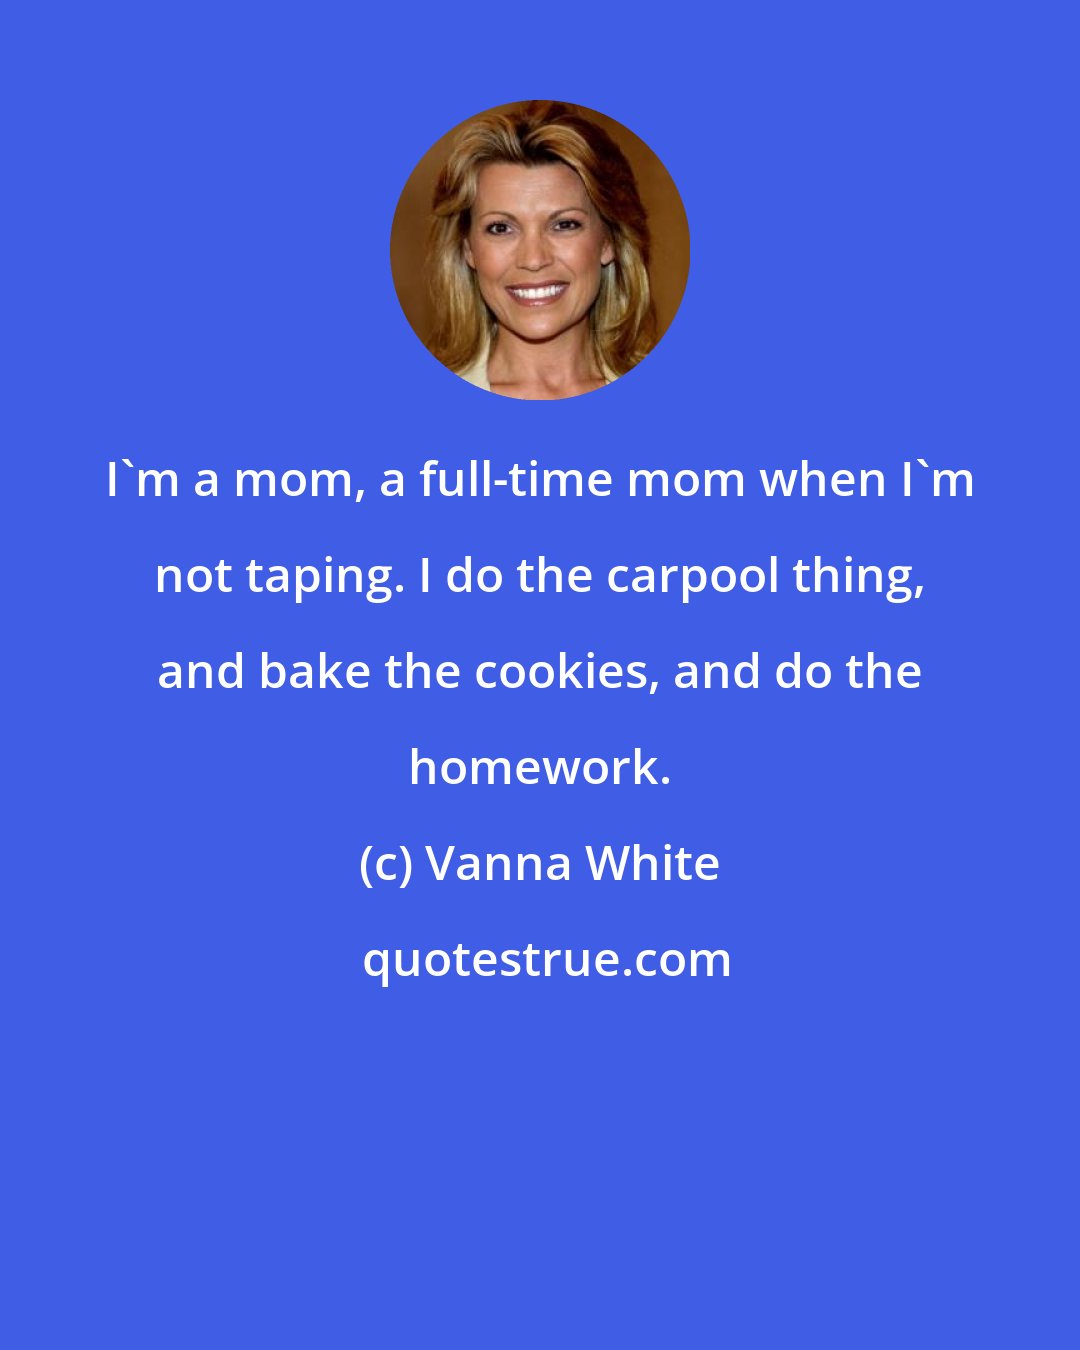 Vanna White: I'm a mom, a full-time mom when I'm not taping. I do the carpool thing, and bake the cookies, and do the homework.